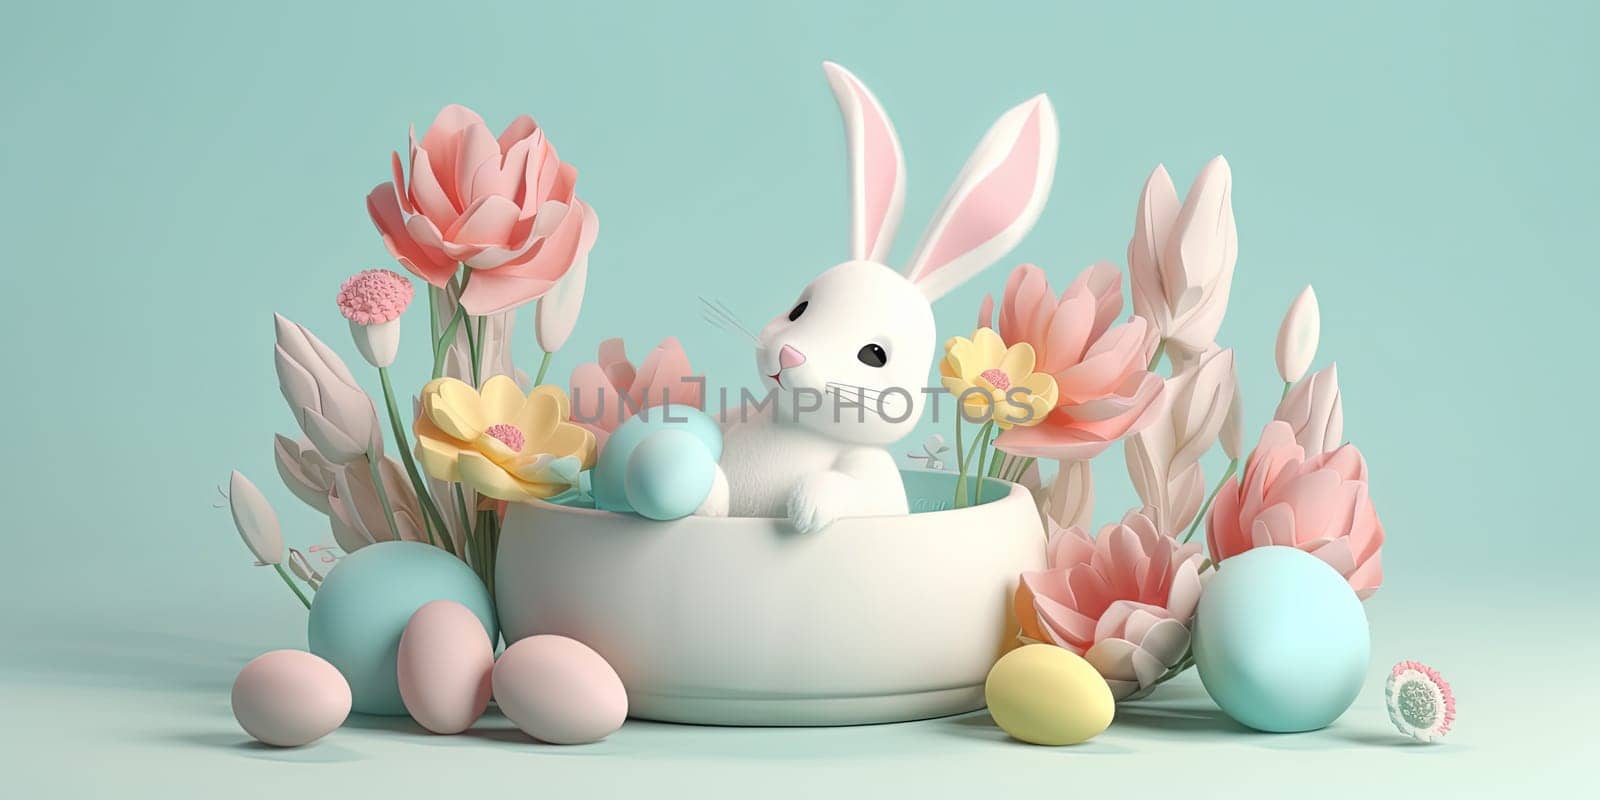 Quilling Colorful Paper Flowers And Easter Rabbit by tan4ikk1